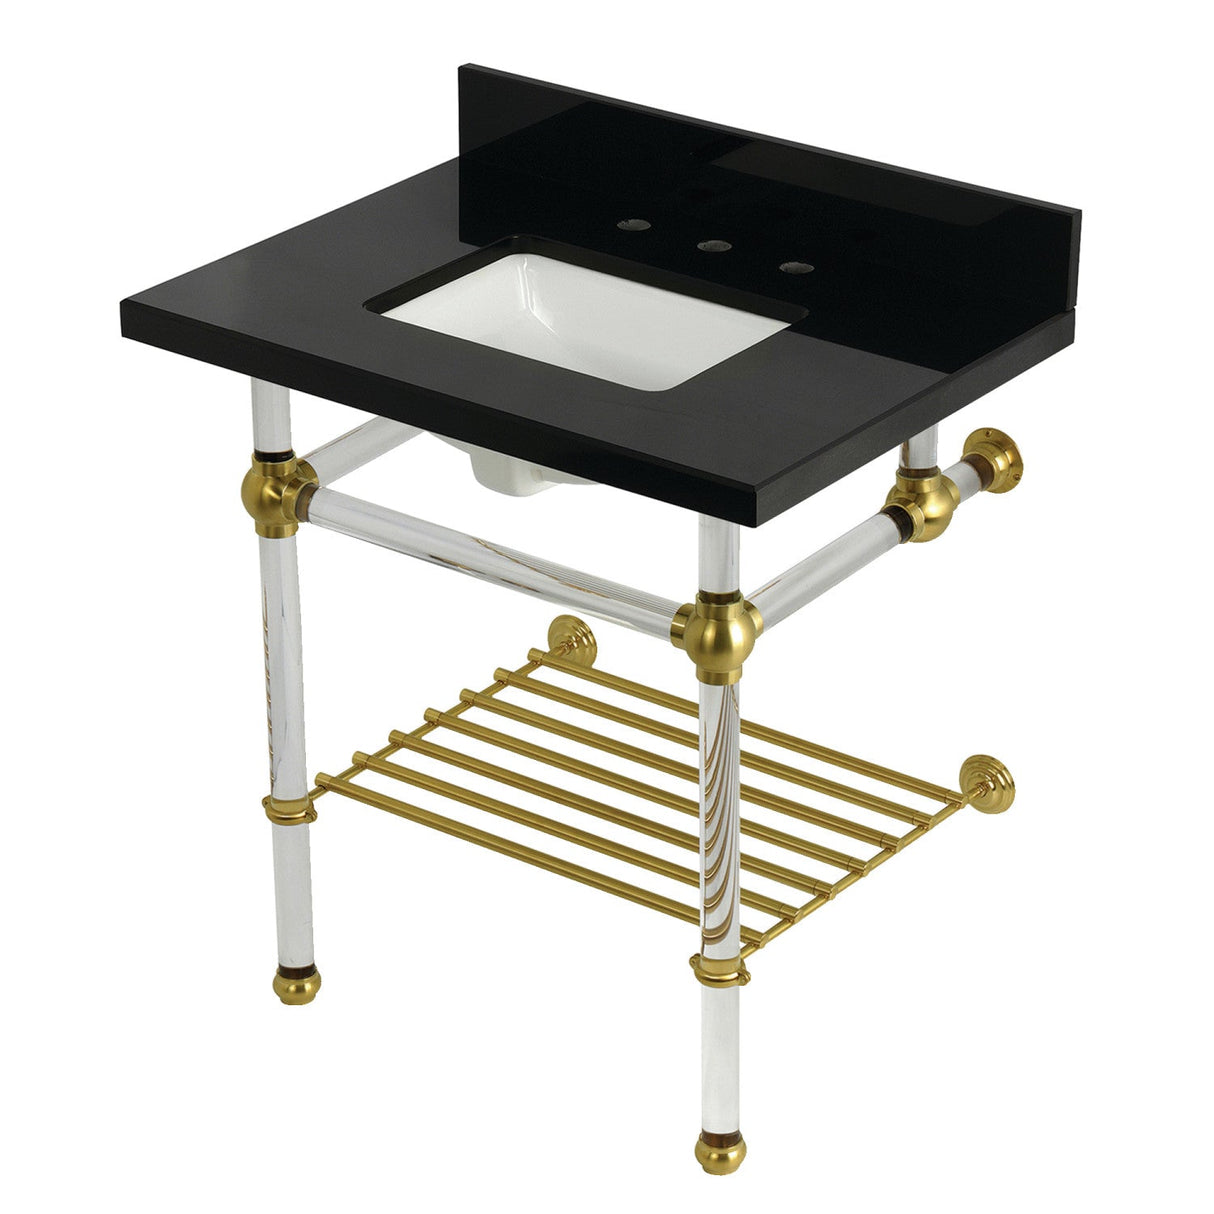 Templeton KVPK3030KASQB7 30-Inch Console Sink with Acrylic Legs (8-Inch, 3 Hole), Black Granite/Brushed Brass